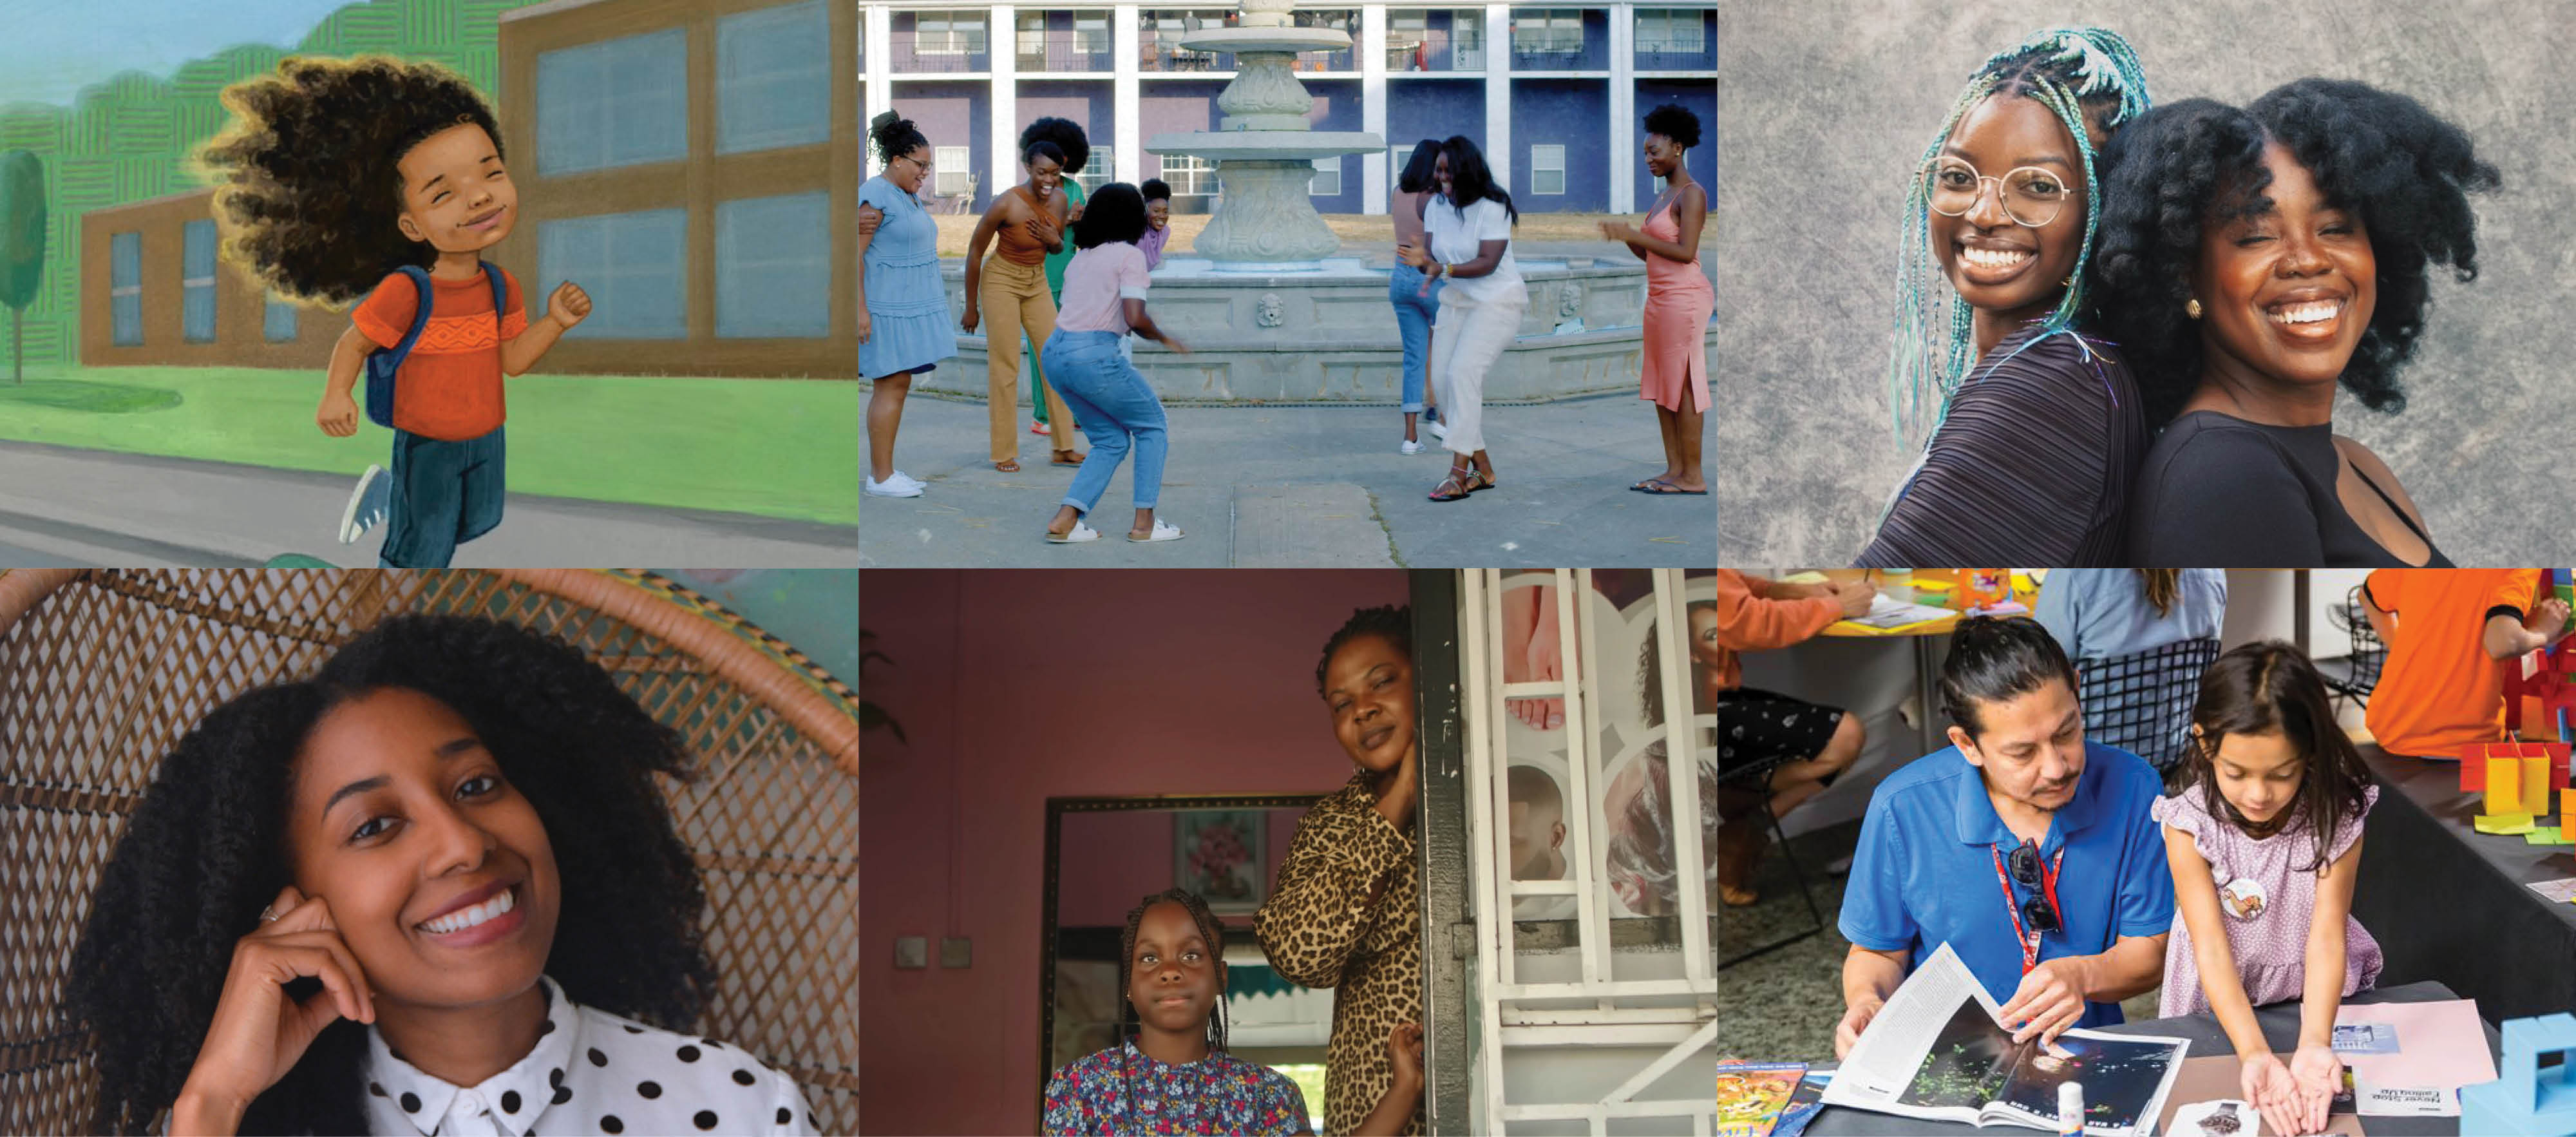 Collage featuring an illustration from A Boy and His Mirror, illustrator Keturah Bobo, stills from the film Ampe, Ife Oluwamuyide and Claudia Owusu, and a child showing artwork to an adult.